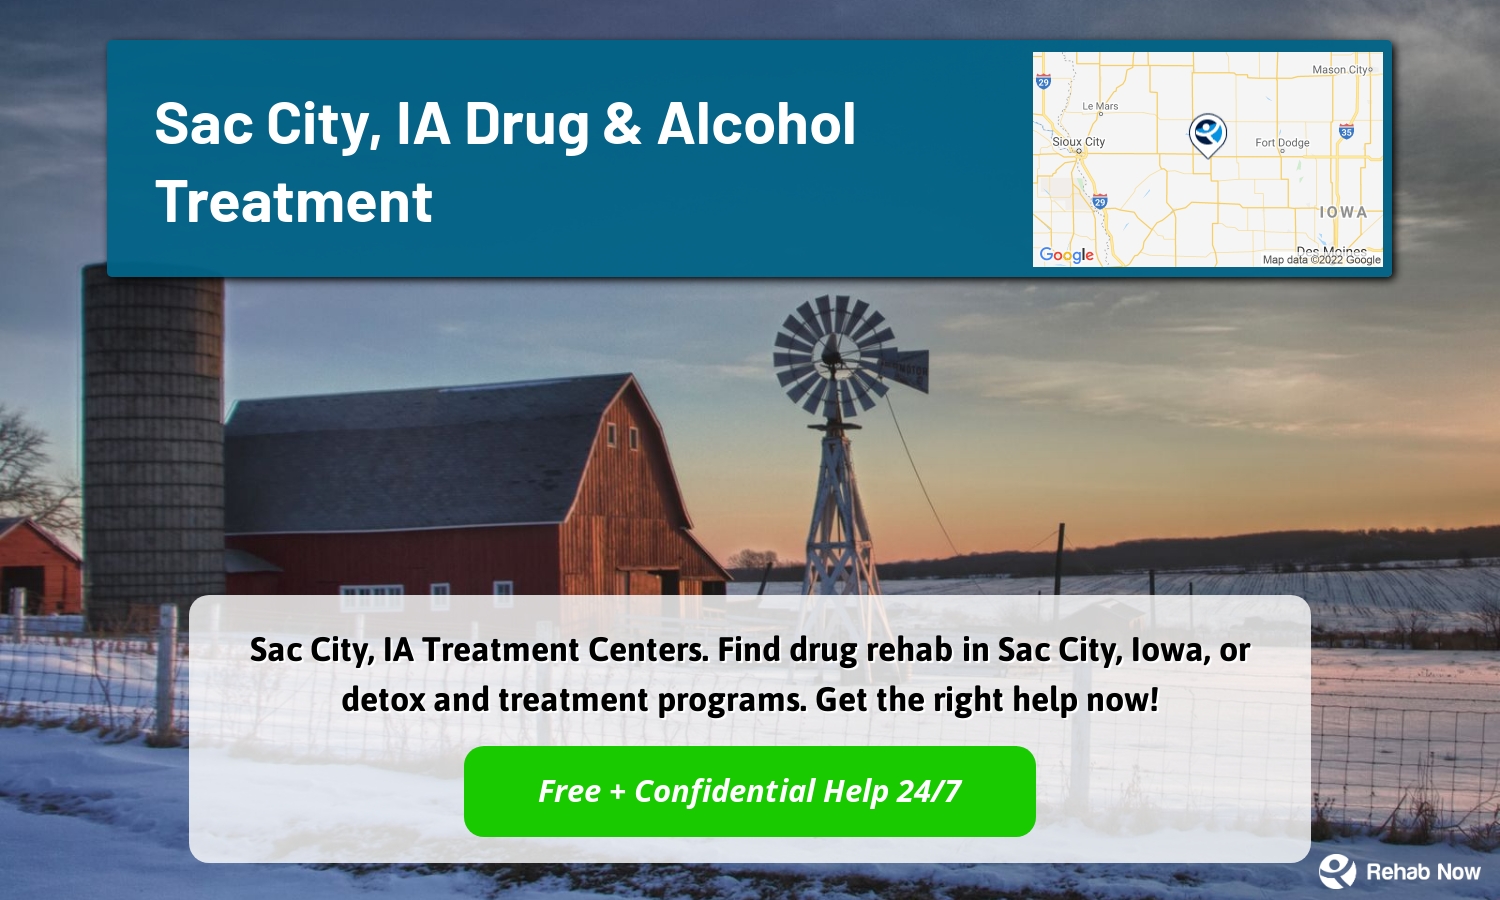 Sac City, IA Treatment Centers. Find drug rehab in Sac City, Iowa, or detox and treatment programs. Get the right help now!